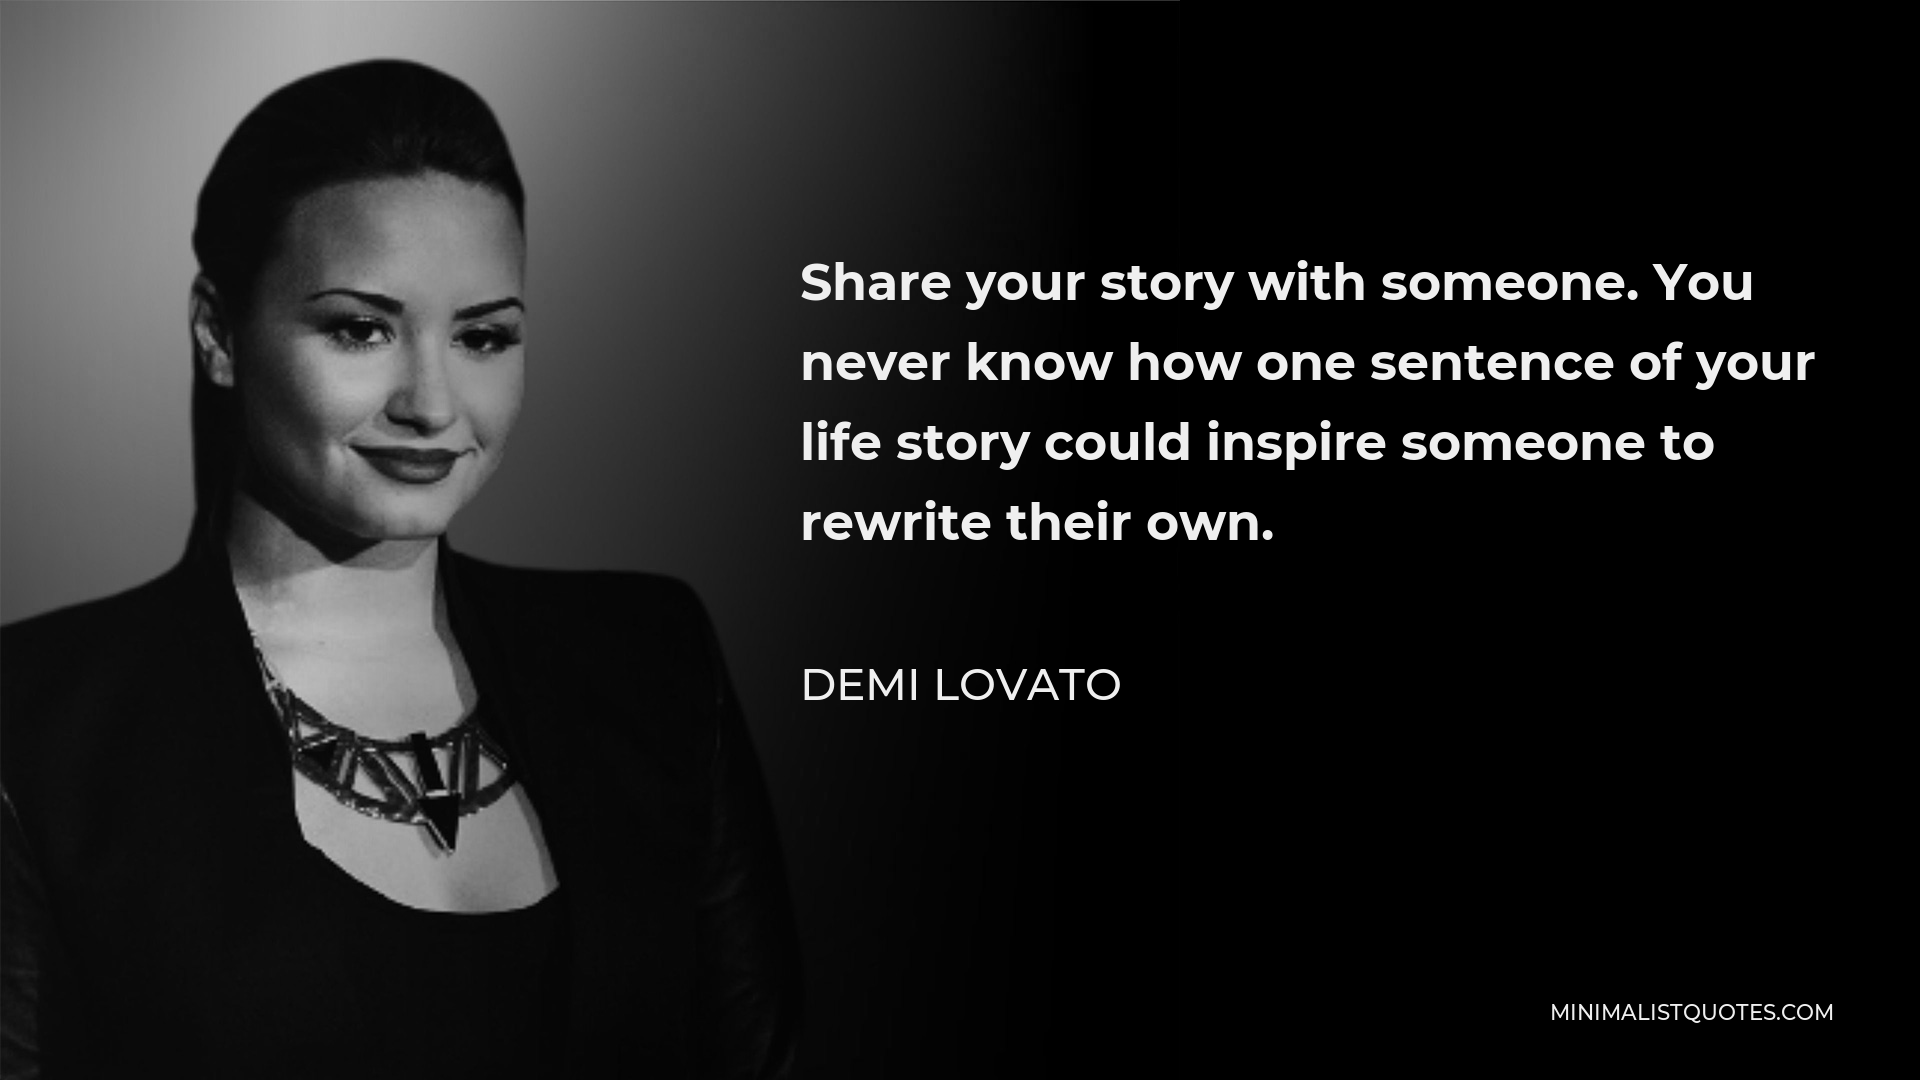 Demi Lovato Quote - Share your story with someone. You never know how one sentence of your life story could inspire someone to rewrite their own.